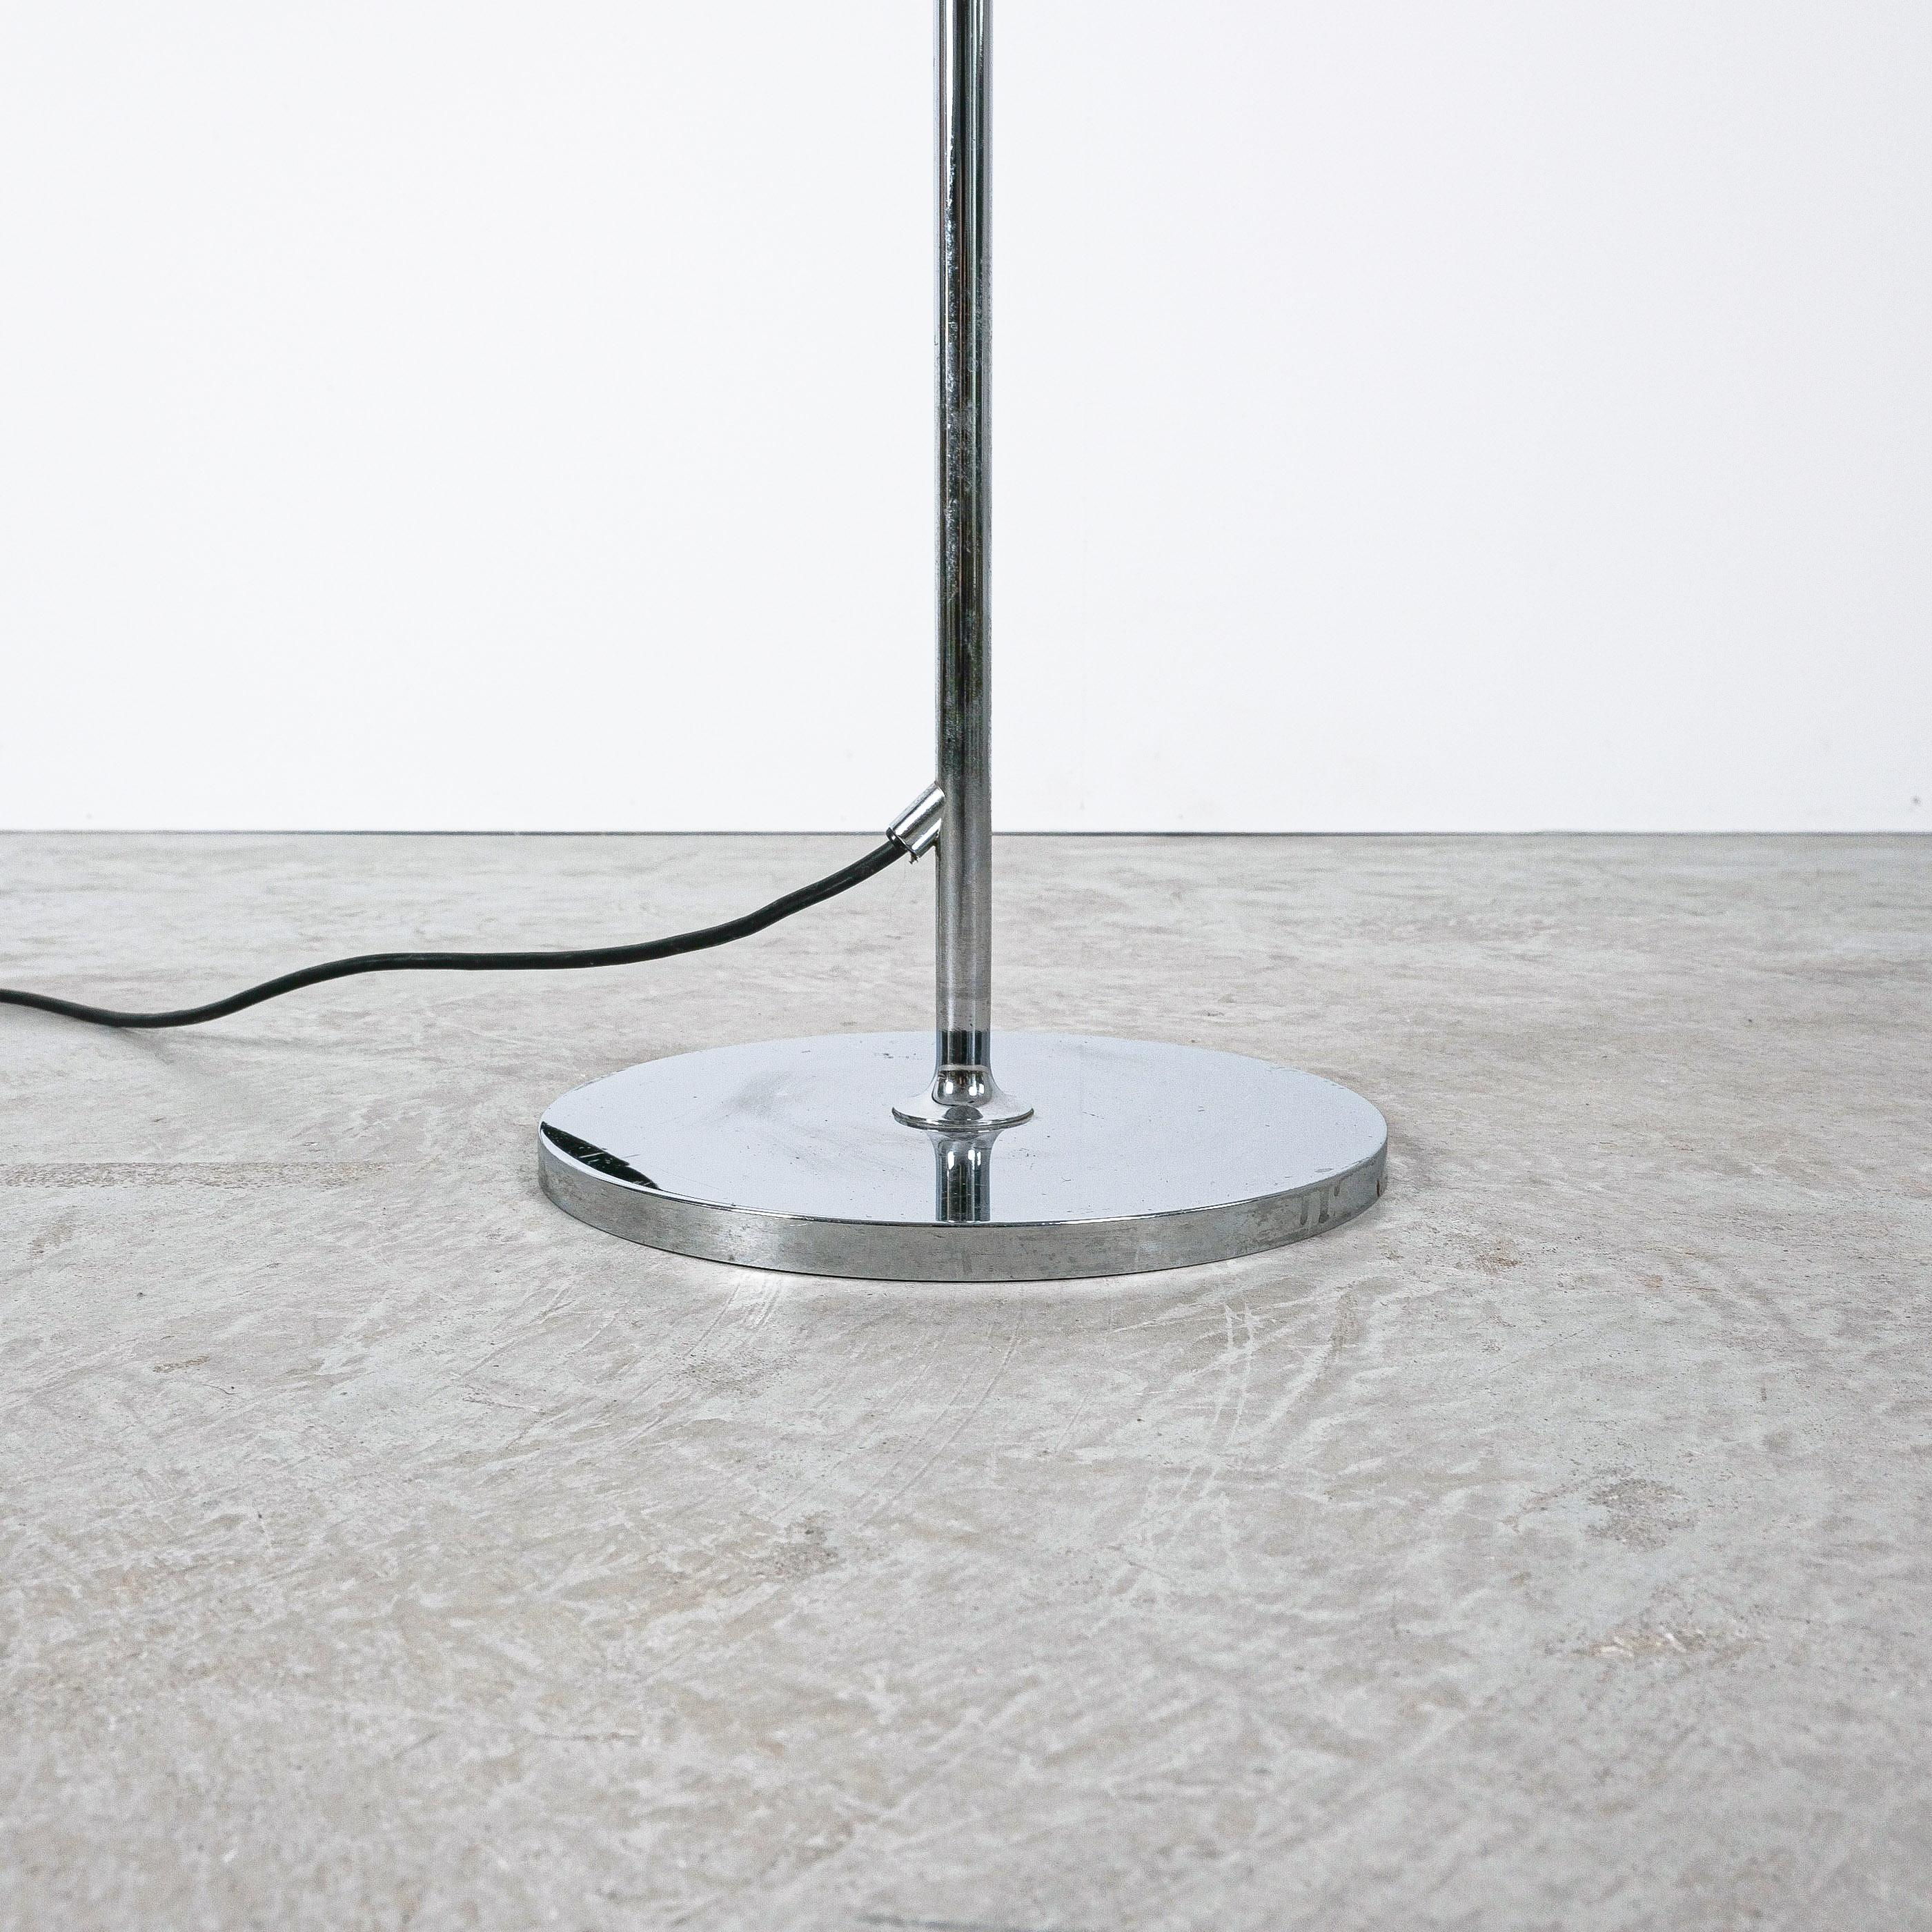 Late 20th Century Florian Schulz Chrome Brass Floor Lamp with Adjustable Shade and Stem, 1970 For Sale